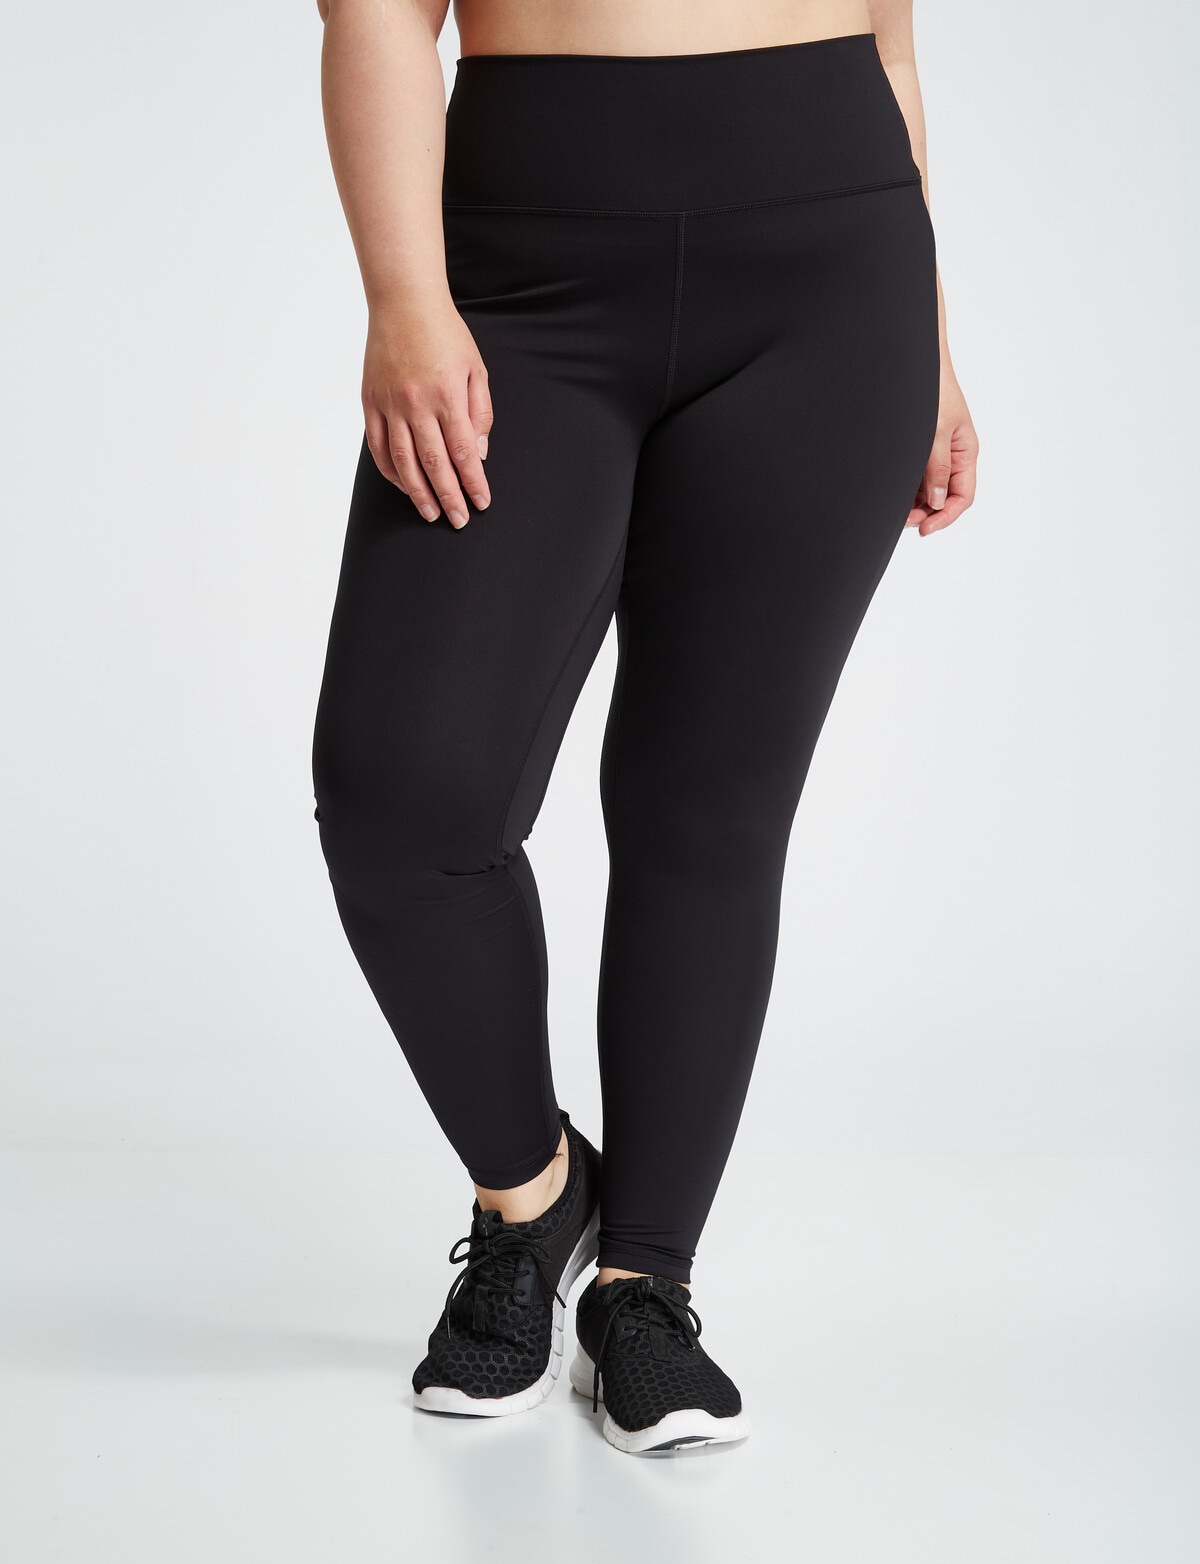 Superfit Curve Crop Active Limitless Legging, Petrol - Womens Red Dot